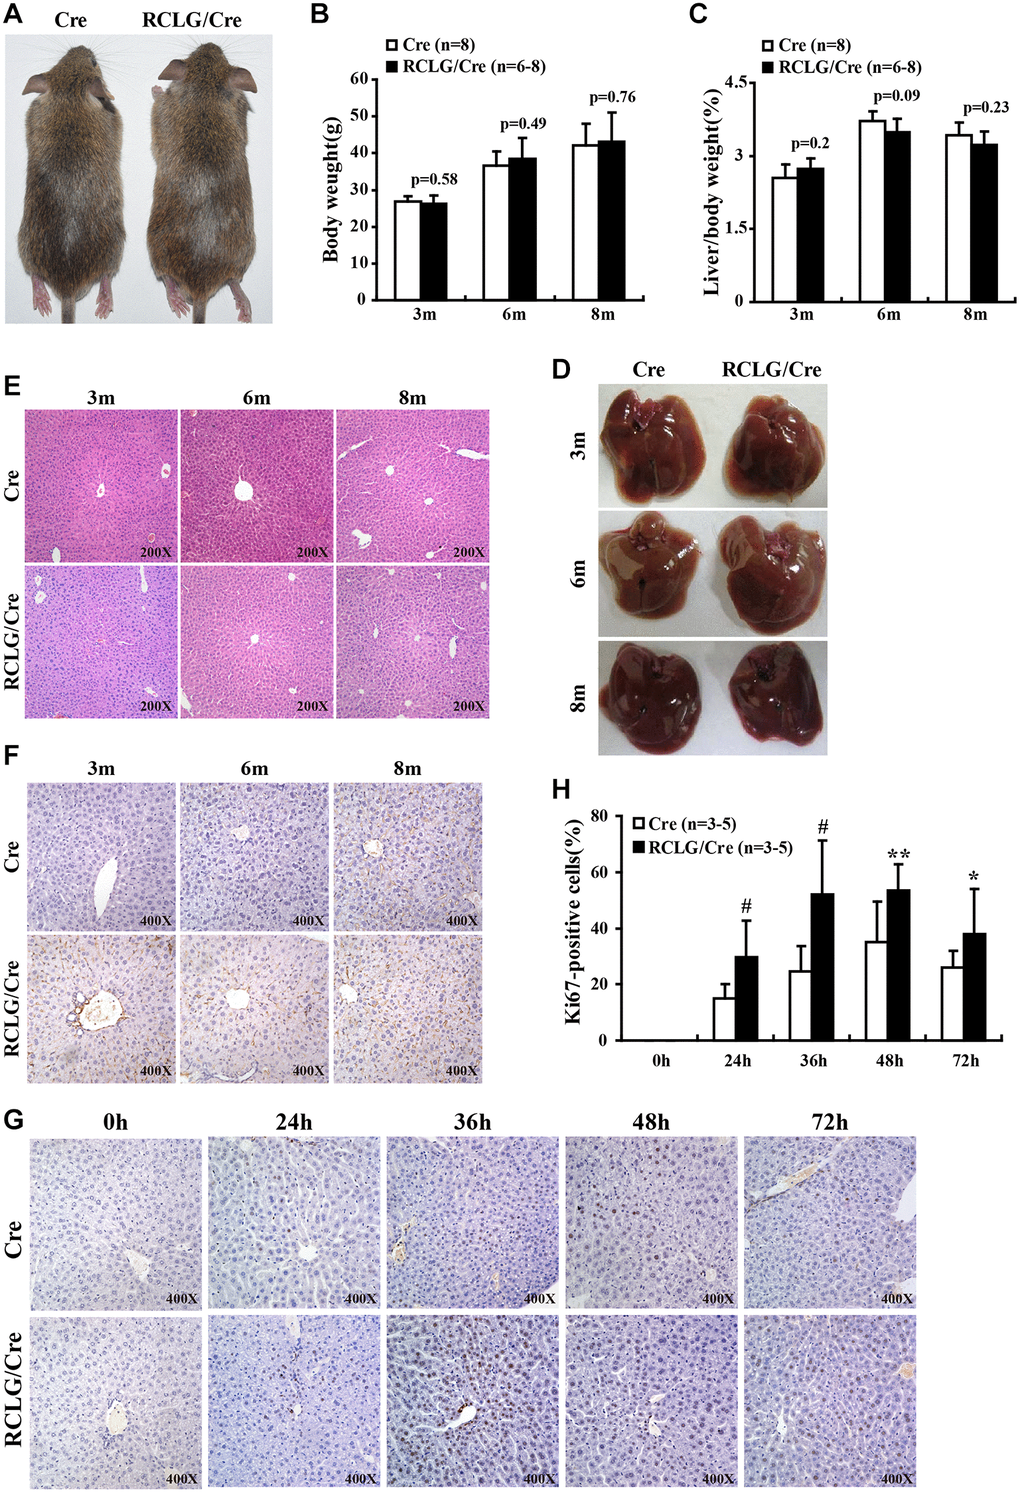 CR-1 overexpression enhances hepatocyte proliferation in the liver after 2/3 partial hepatectomy (PHx). (A) Representative images show 5-month old RCLG/Alb-Cre (right) and Alb-Cre (left) mice fed a normal diet. (B) Body weights of 3, 6, and 8 month-old RCLG/Alb-Cre and Alb-Cre mice. (C) Relative liver weights of 3, 6, and 8 month-old RCLG/Alb-Cre and Alb-Cre mice. (D) Representative images show gross morphology of livers from 3, 6, and 8 month-old RCLG/Alb-Cre (right) and Alb-Cre (left) mice. (E) Representative images of H&E-stained liver sections from 3, 6, and 8 month-old Alb-Cre and RCLG/Alb-Cre mice. (F) Representative Ki-67 immunostaining images show proliferation status of hepatocytes from 3, 6, and 8 month-old Alb-Cre and RCLG/Alb-Cre mice. (G) Representative Ki-67 immunostaining images show proliferation of hepatocytes from RCLG/Alb-Cre and Alb-Cre mice at 0, 24, 36, 48, and 72 h after PHx. (H) Quantitative analysis of hepatocyte proliferation based on Ki-67 immunostaining at 0, 24, 36, 48, and 72 h after PHx in RCLG/Alb-Cre (n = 3–5) and Alb-Cre (n = 3–5) mice.